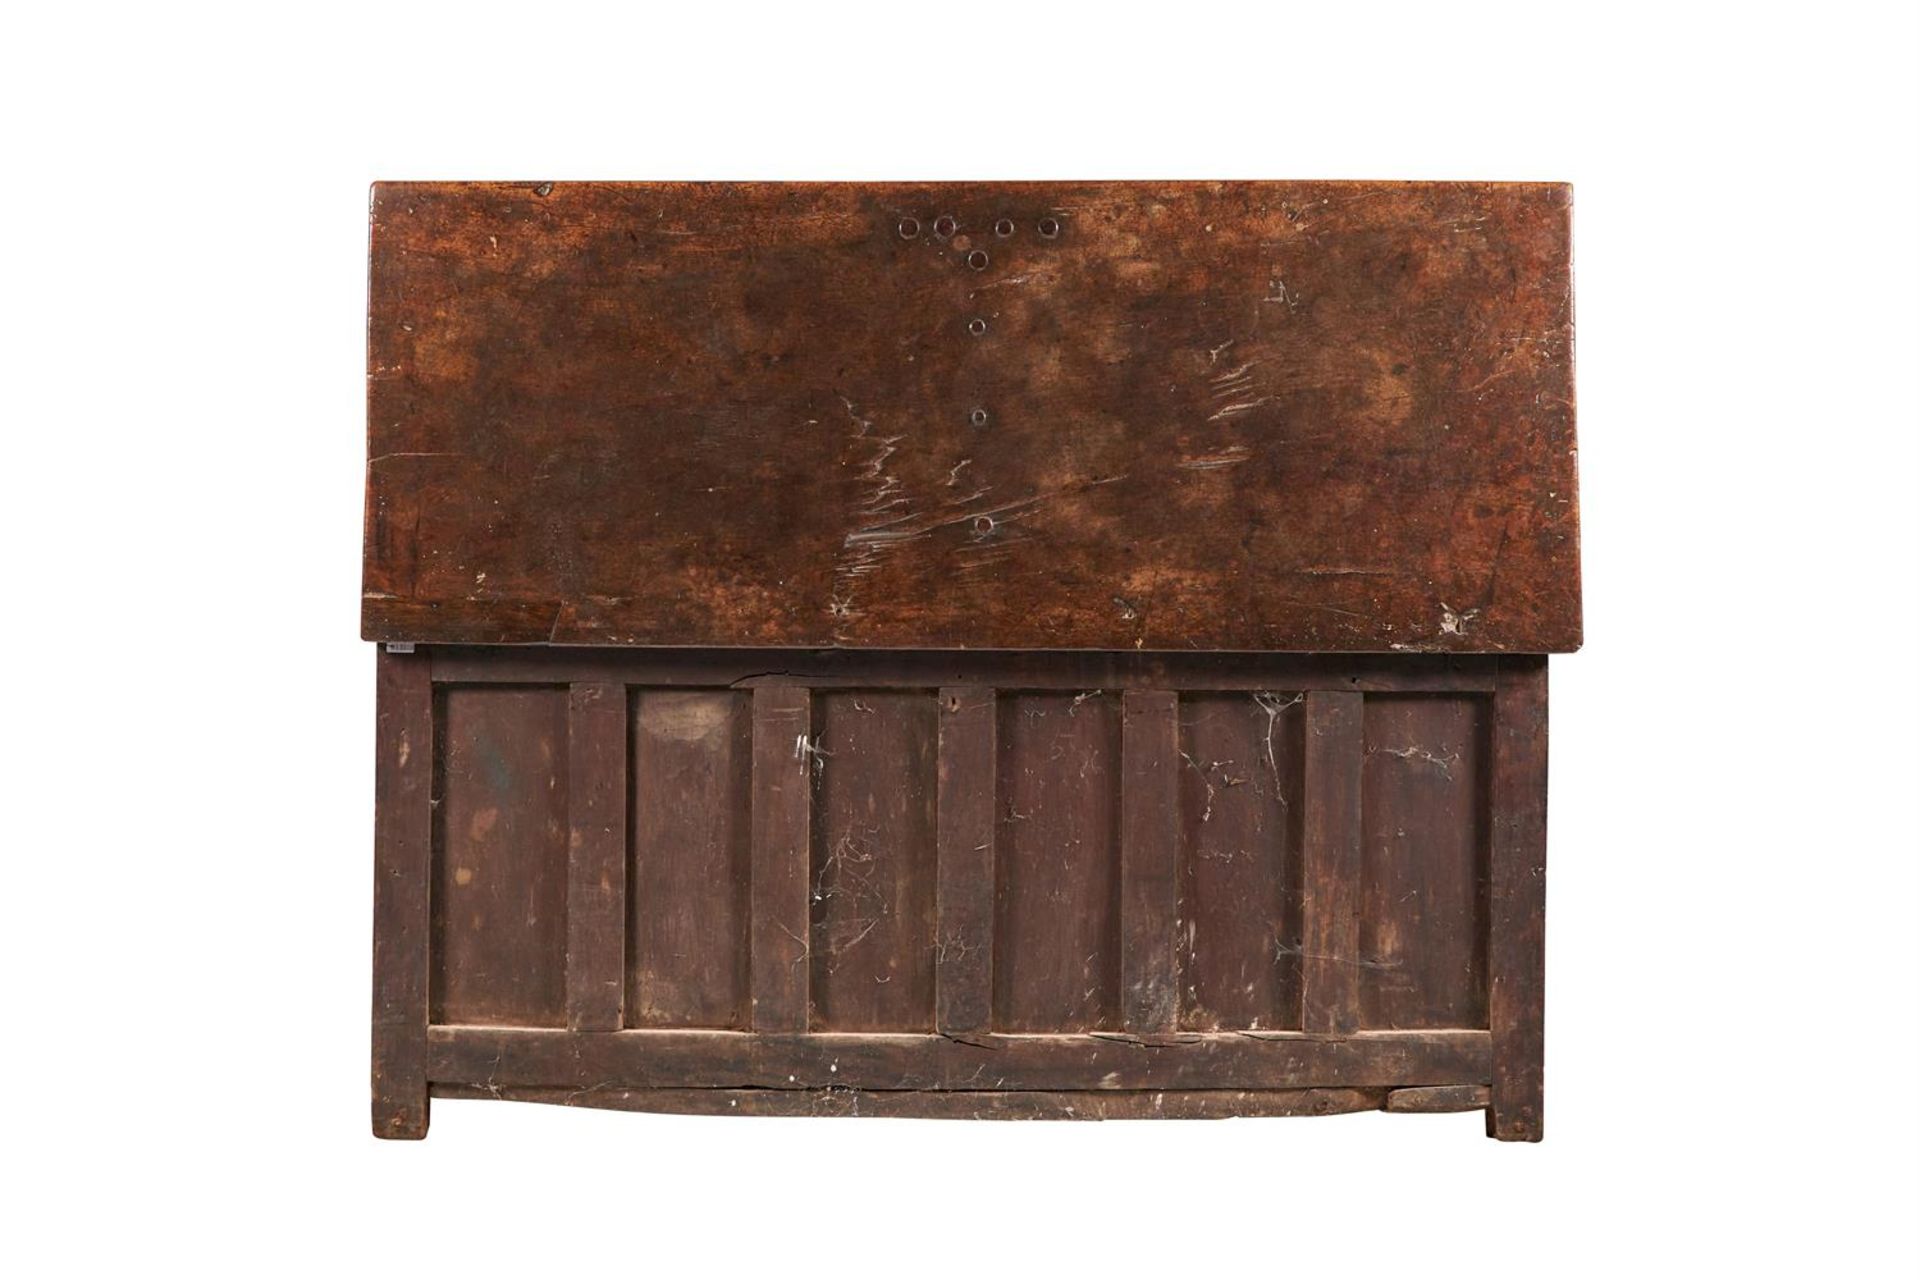 AN OAK COFFER, LATE 16TH/EARLY 17TH CENTURY - Image 4 of 4